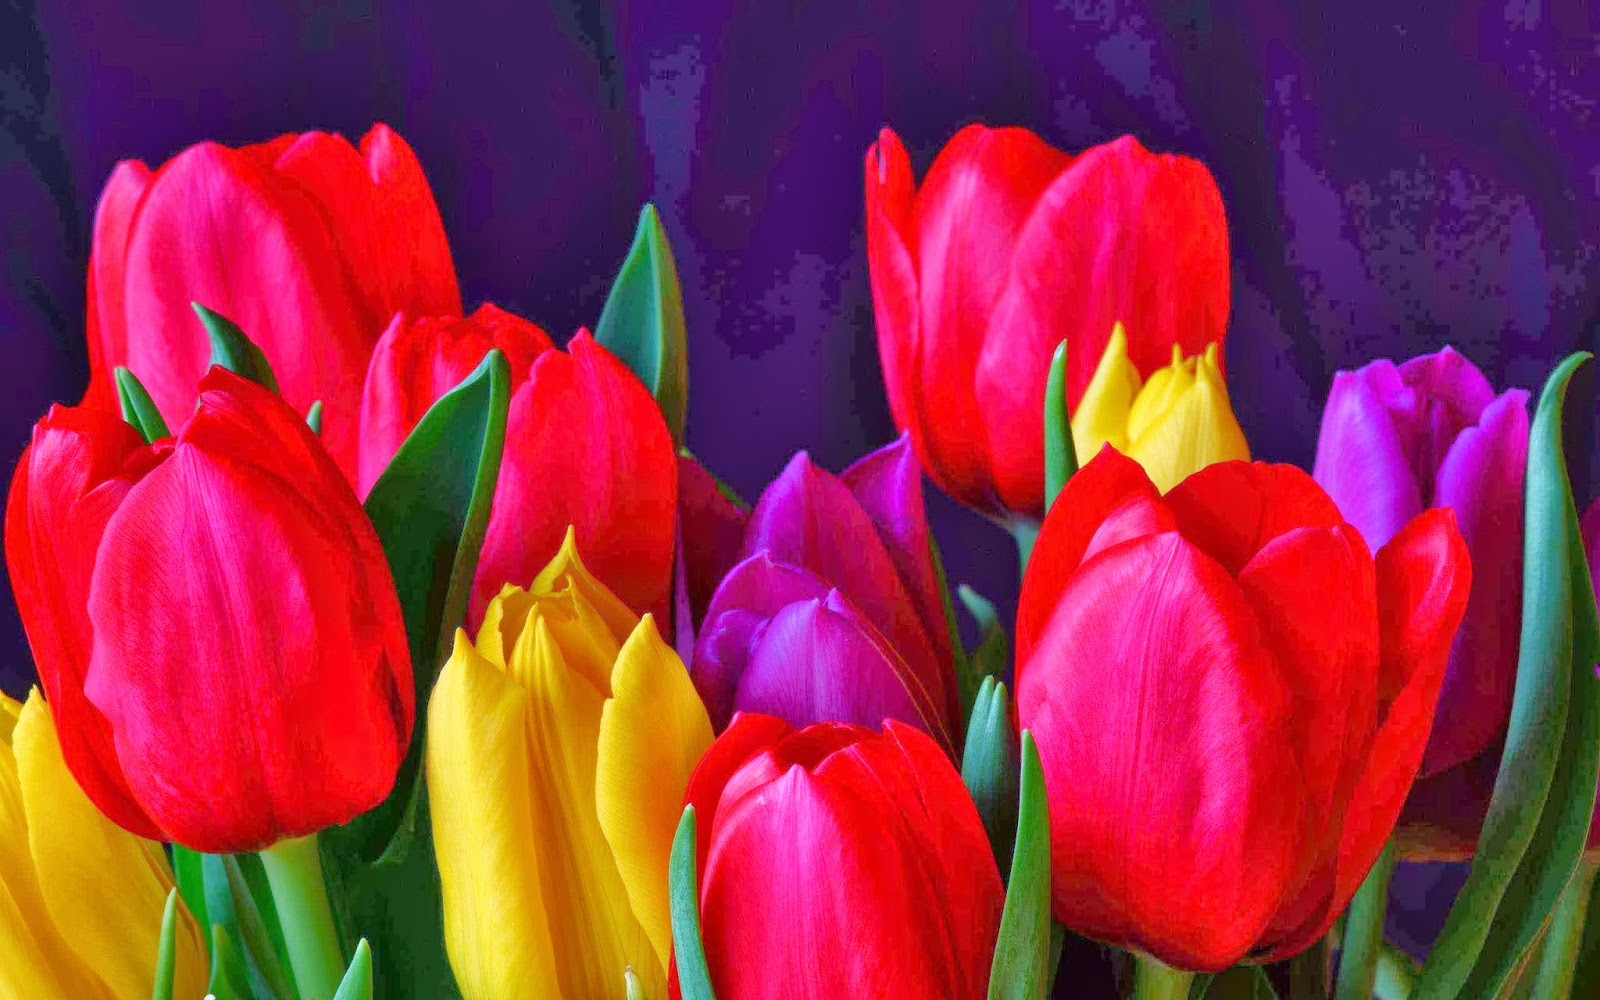 What A Beautiful This Tulip Flower The That Populer In